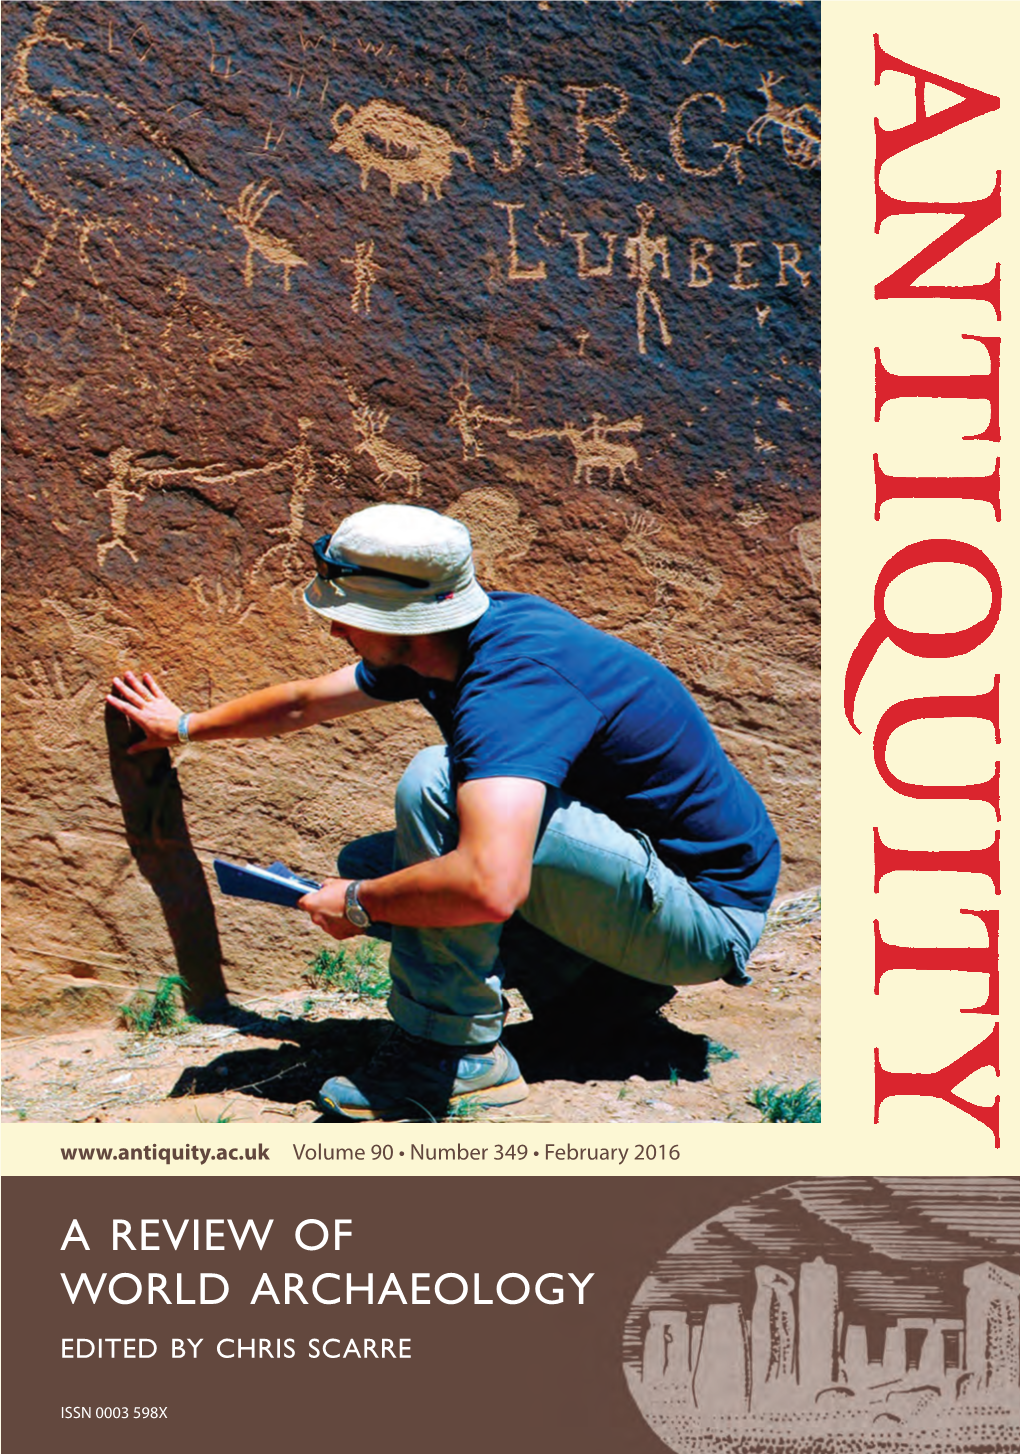 A Review of World Archaeology